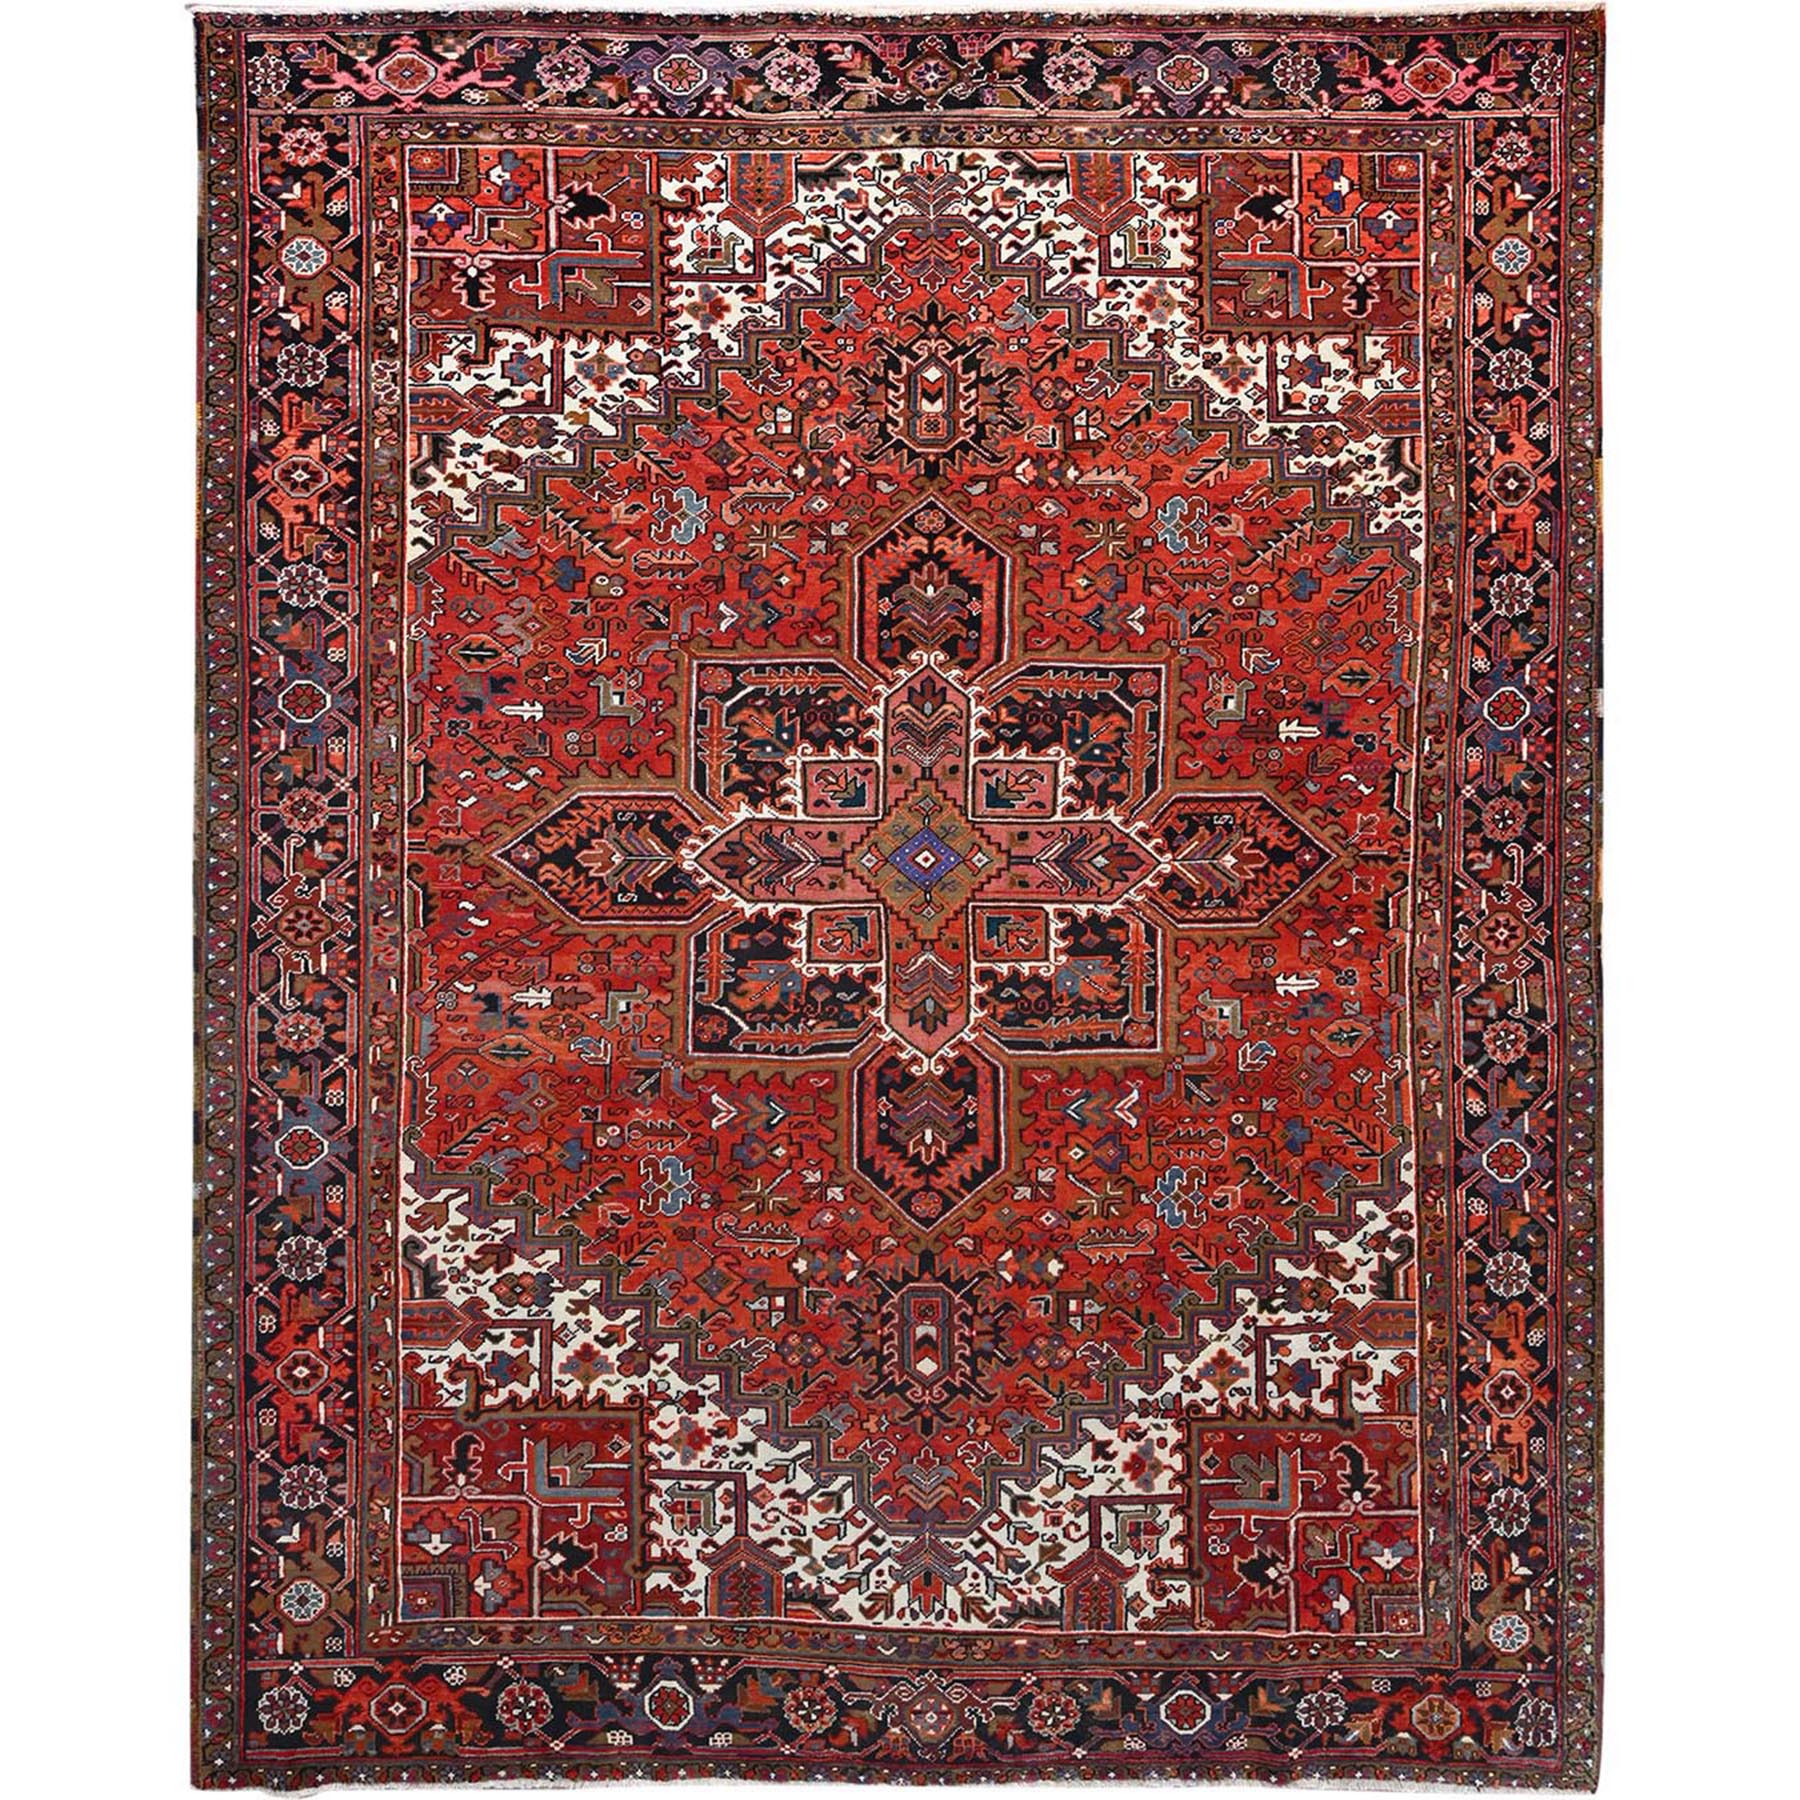  Wool Hand-Knotted Area Rug 9'10